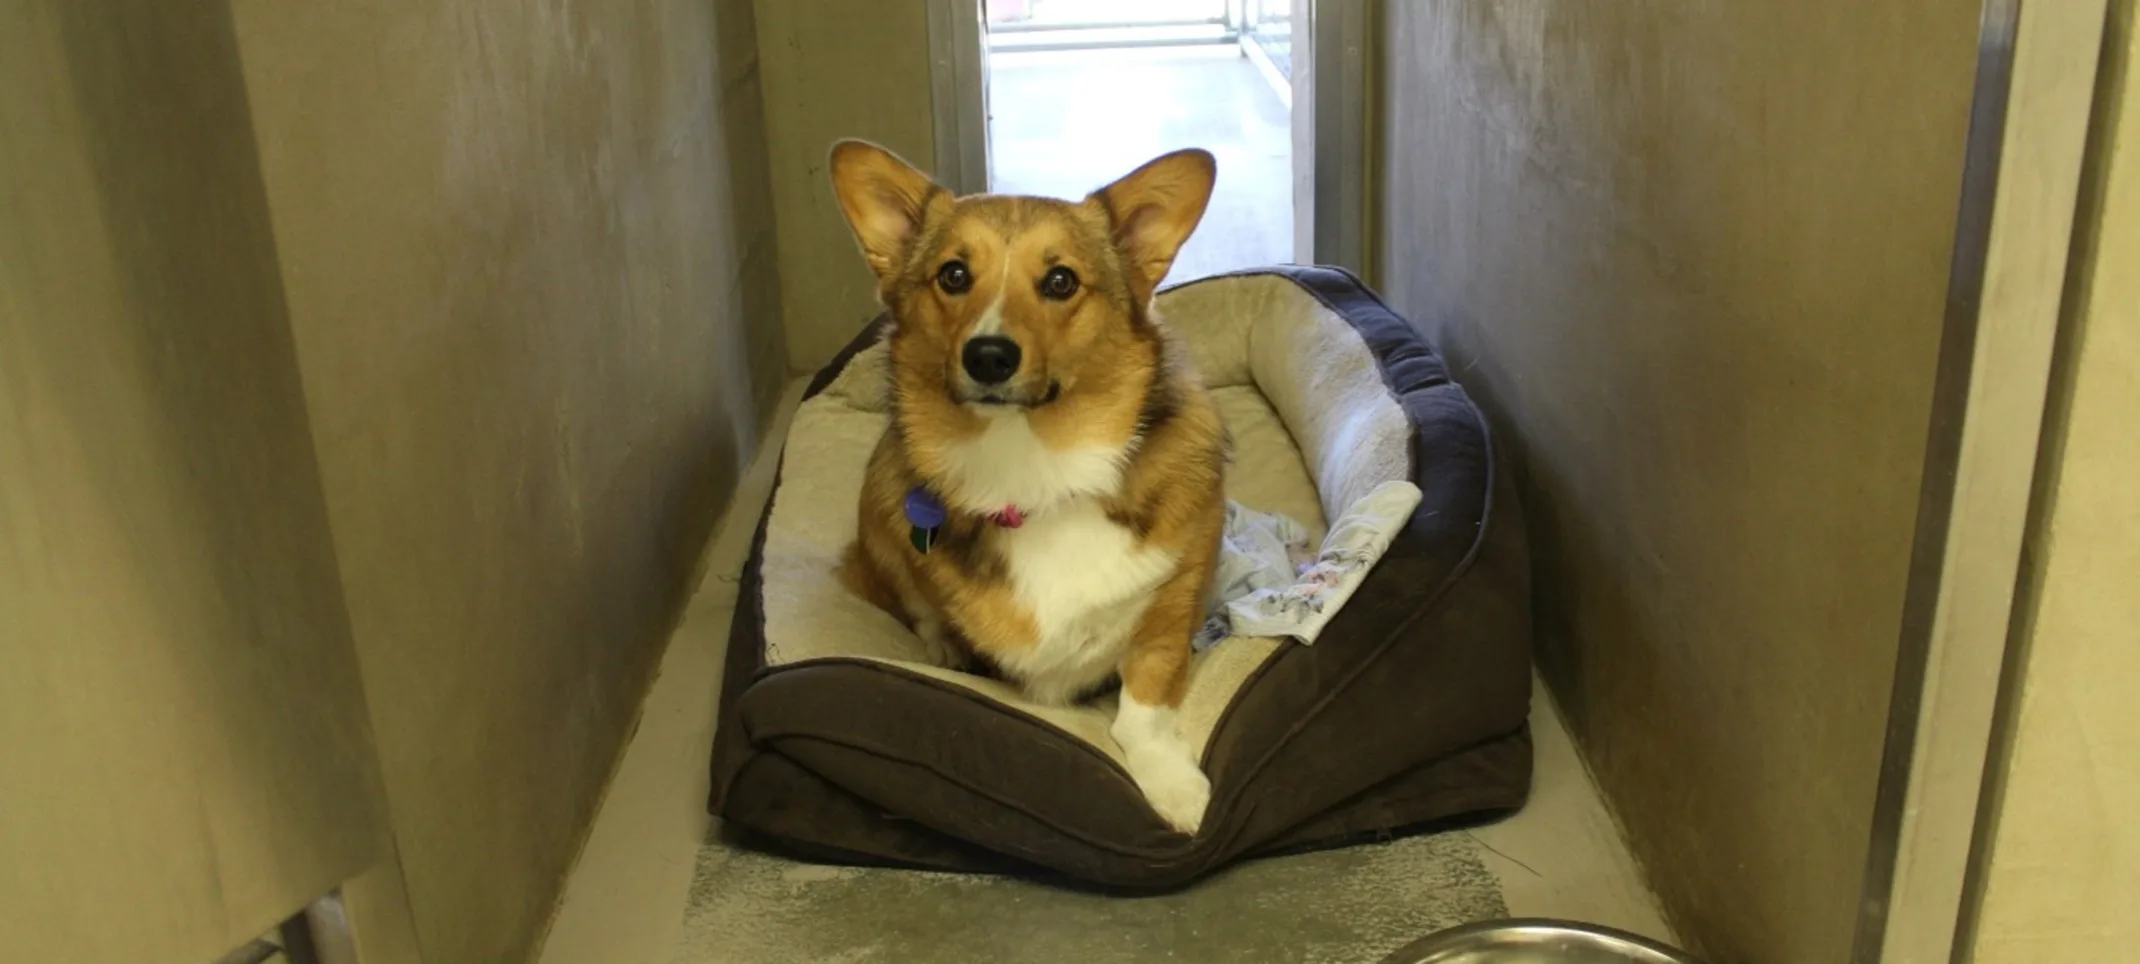 Corgi sitting in a dog bed in a small dog boarding room.